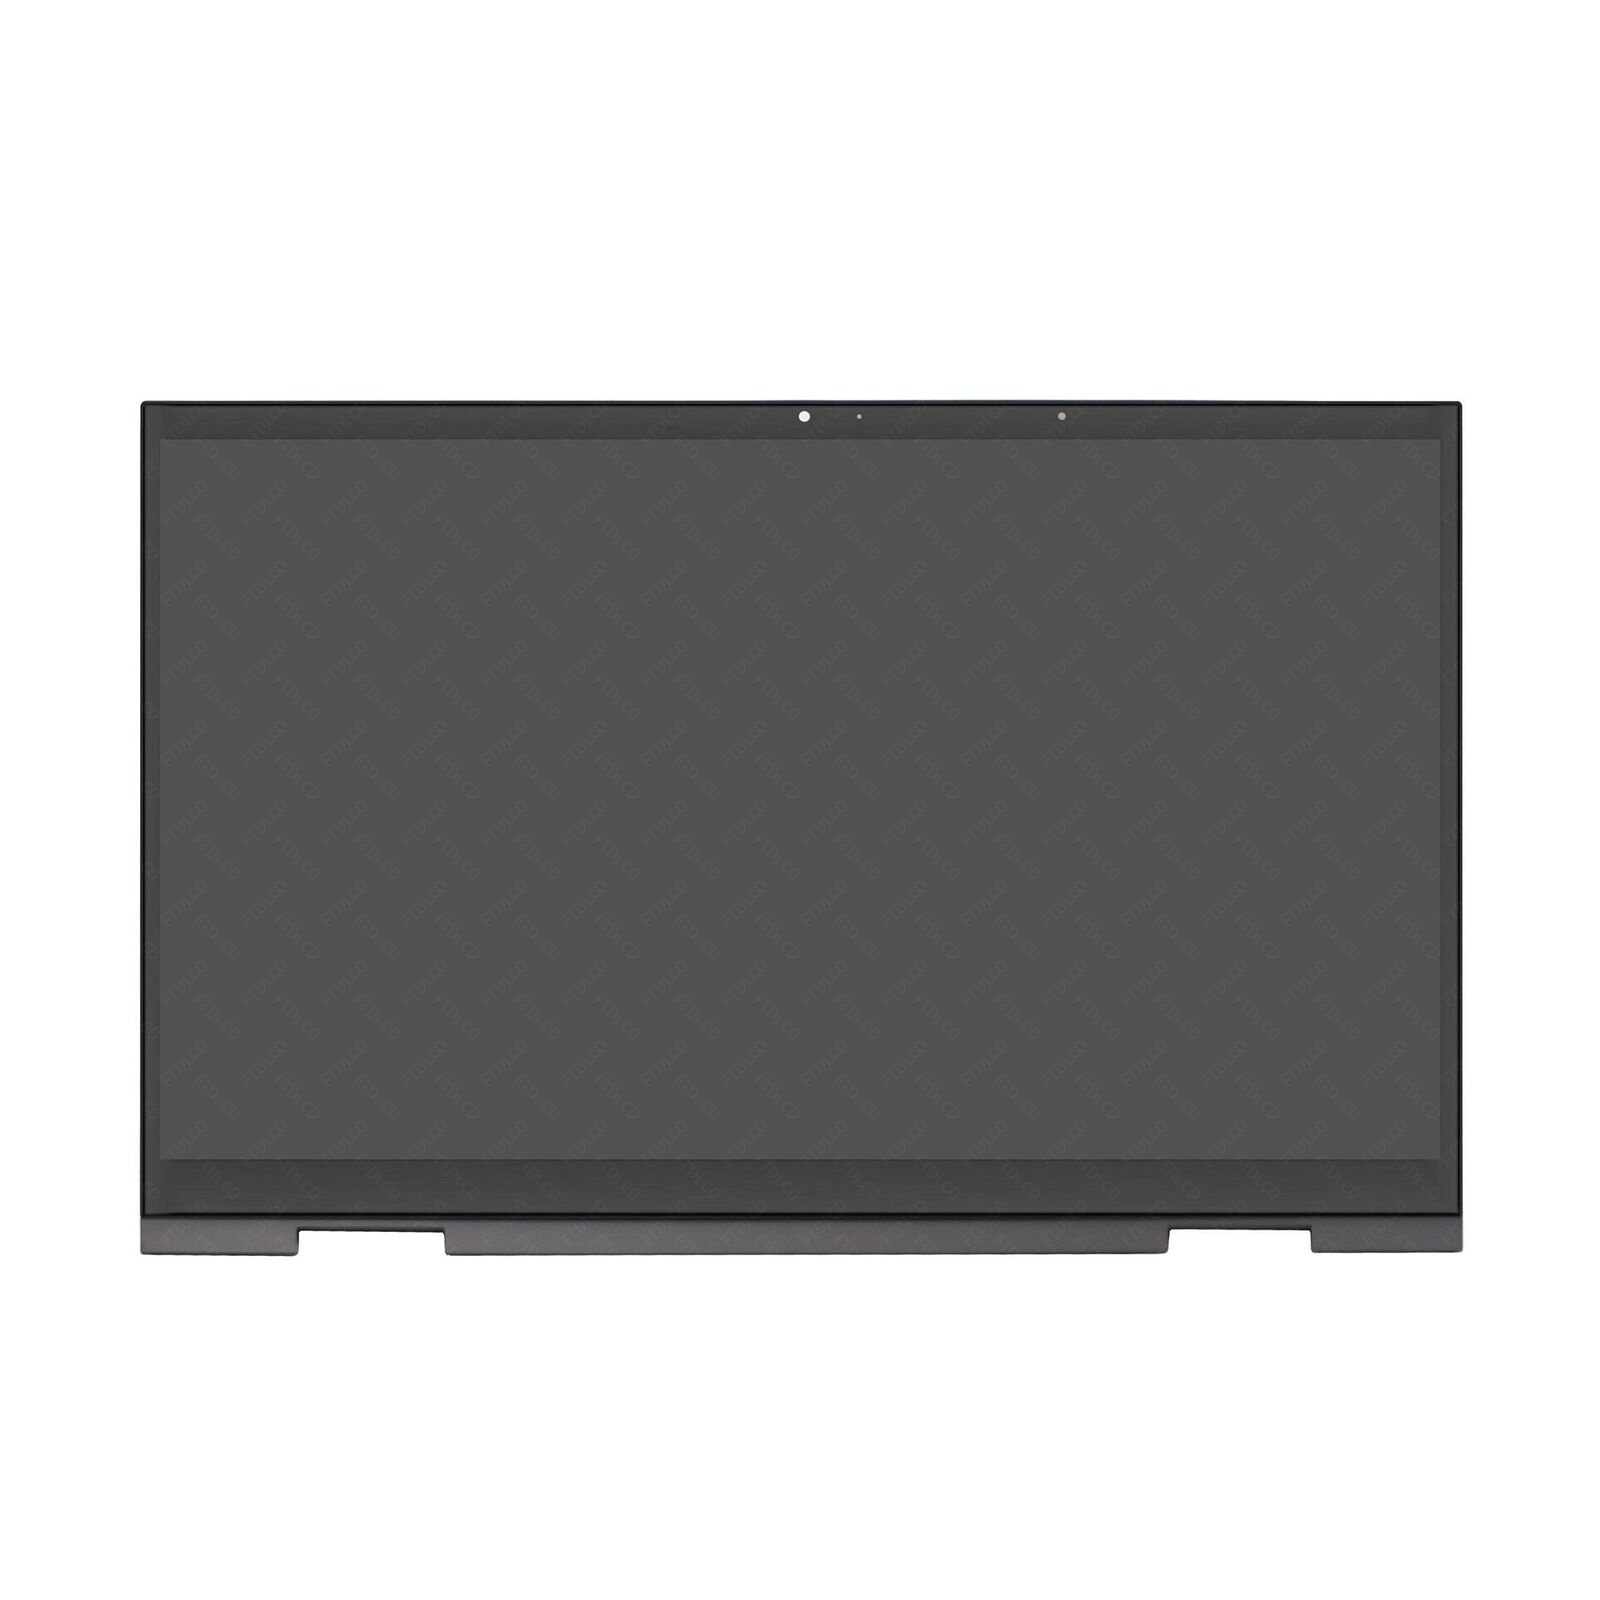 FHD LCD Touchscreen Digitizer IPS Display Assembly for HP ENVY X360 15m-eu0043dx